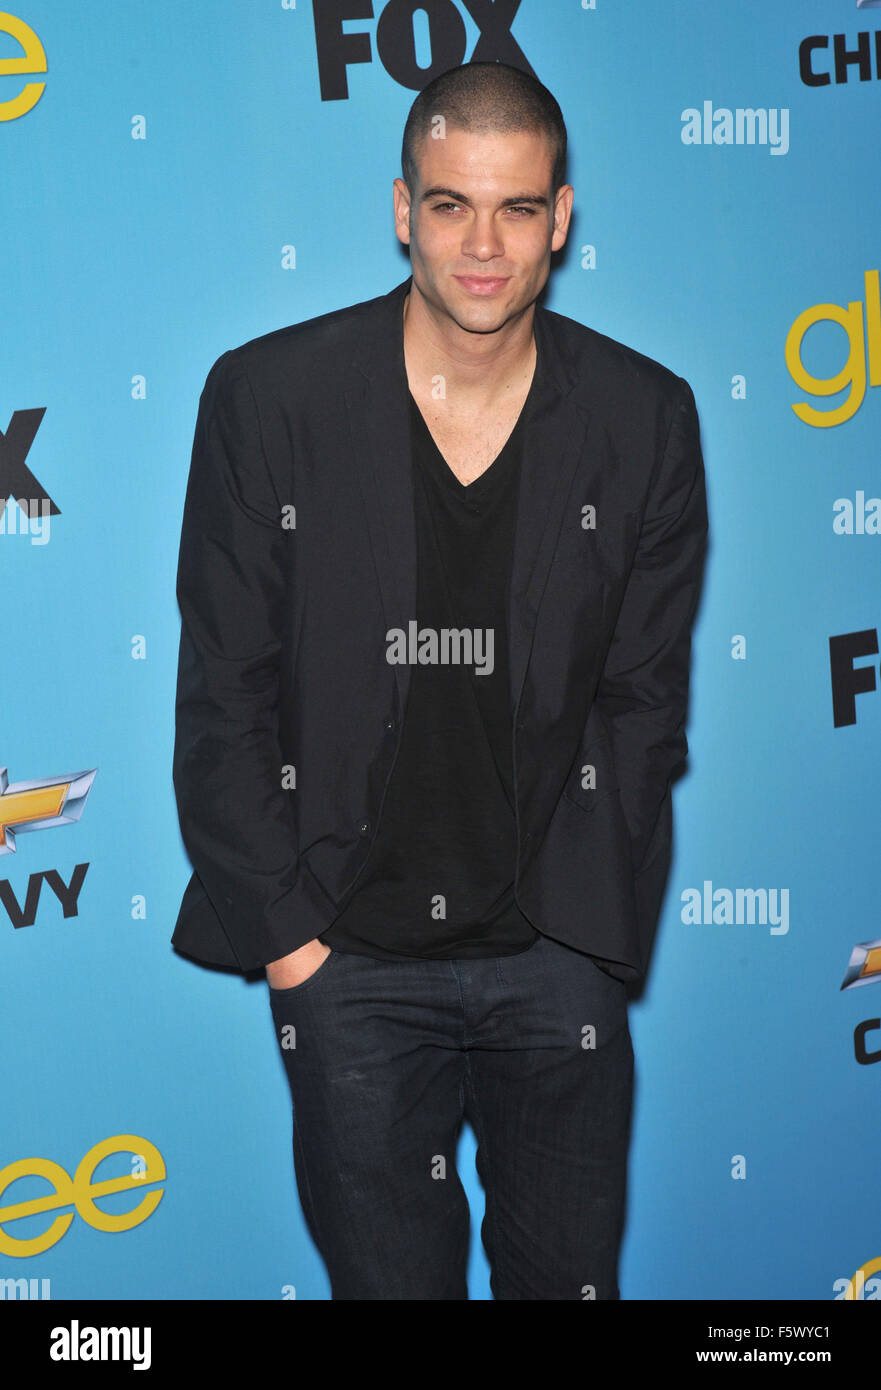 LOS ANGELES, CA - 12. April 2010: Mark jährlicher an der Spring-Serie "Glee" premiere Party im Chateau Marmont, West Hollywood. Stockfoto